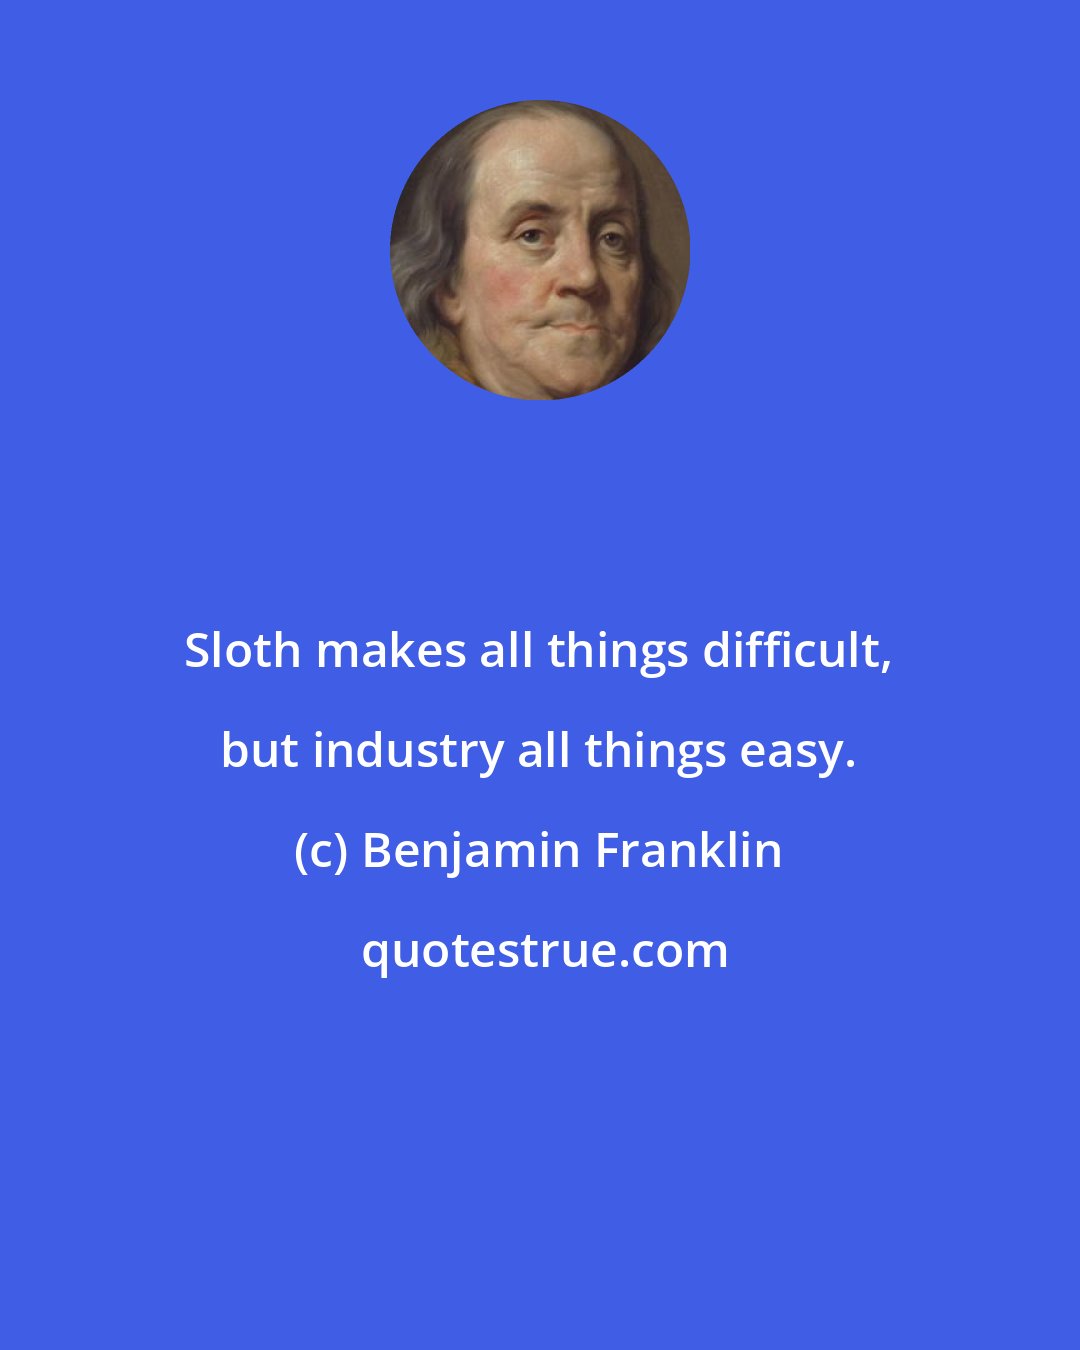 Benjamin Franklin: Sloth makes all things difficult, but industry all things easy.